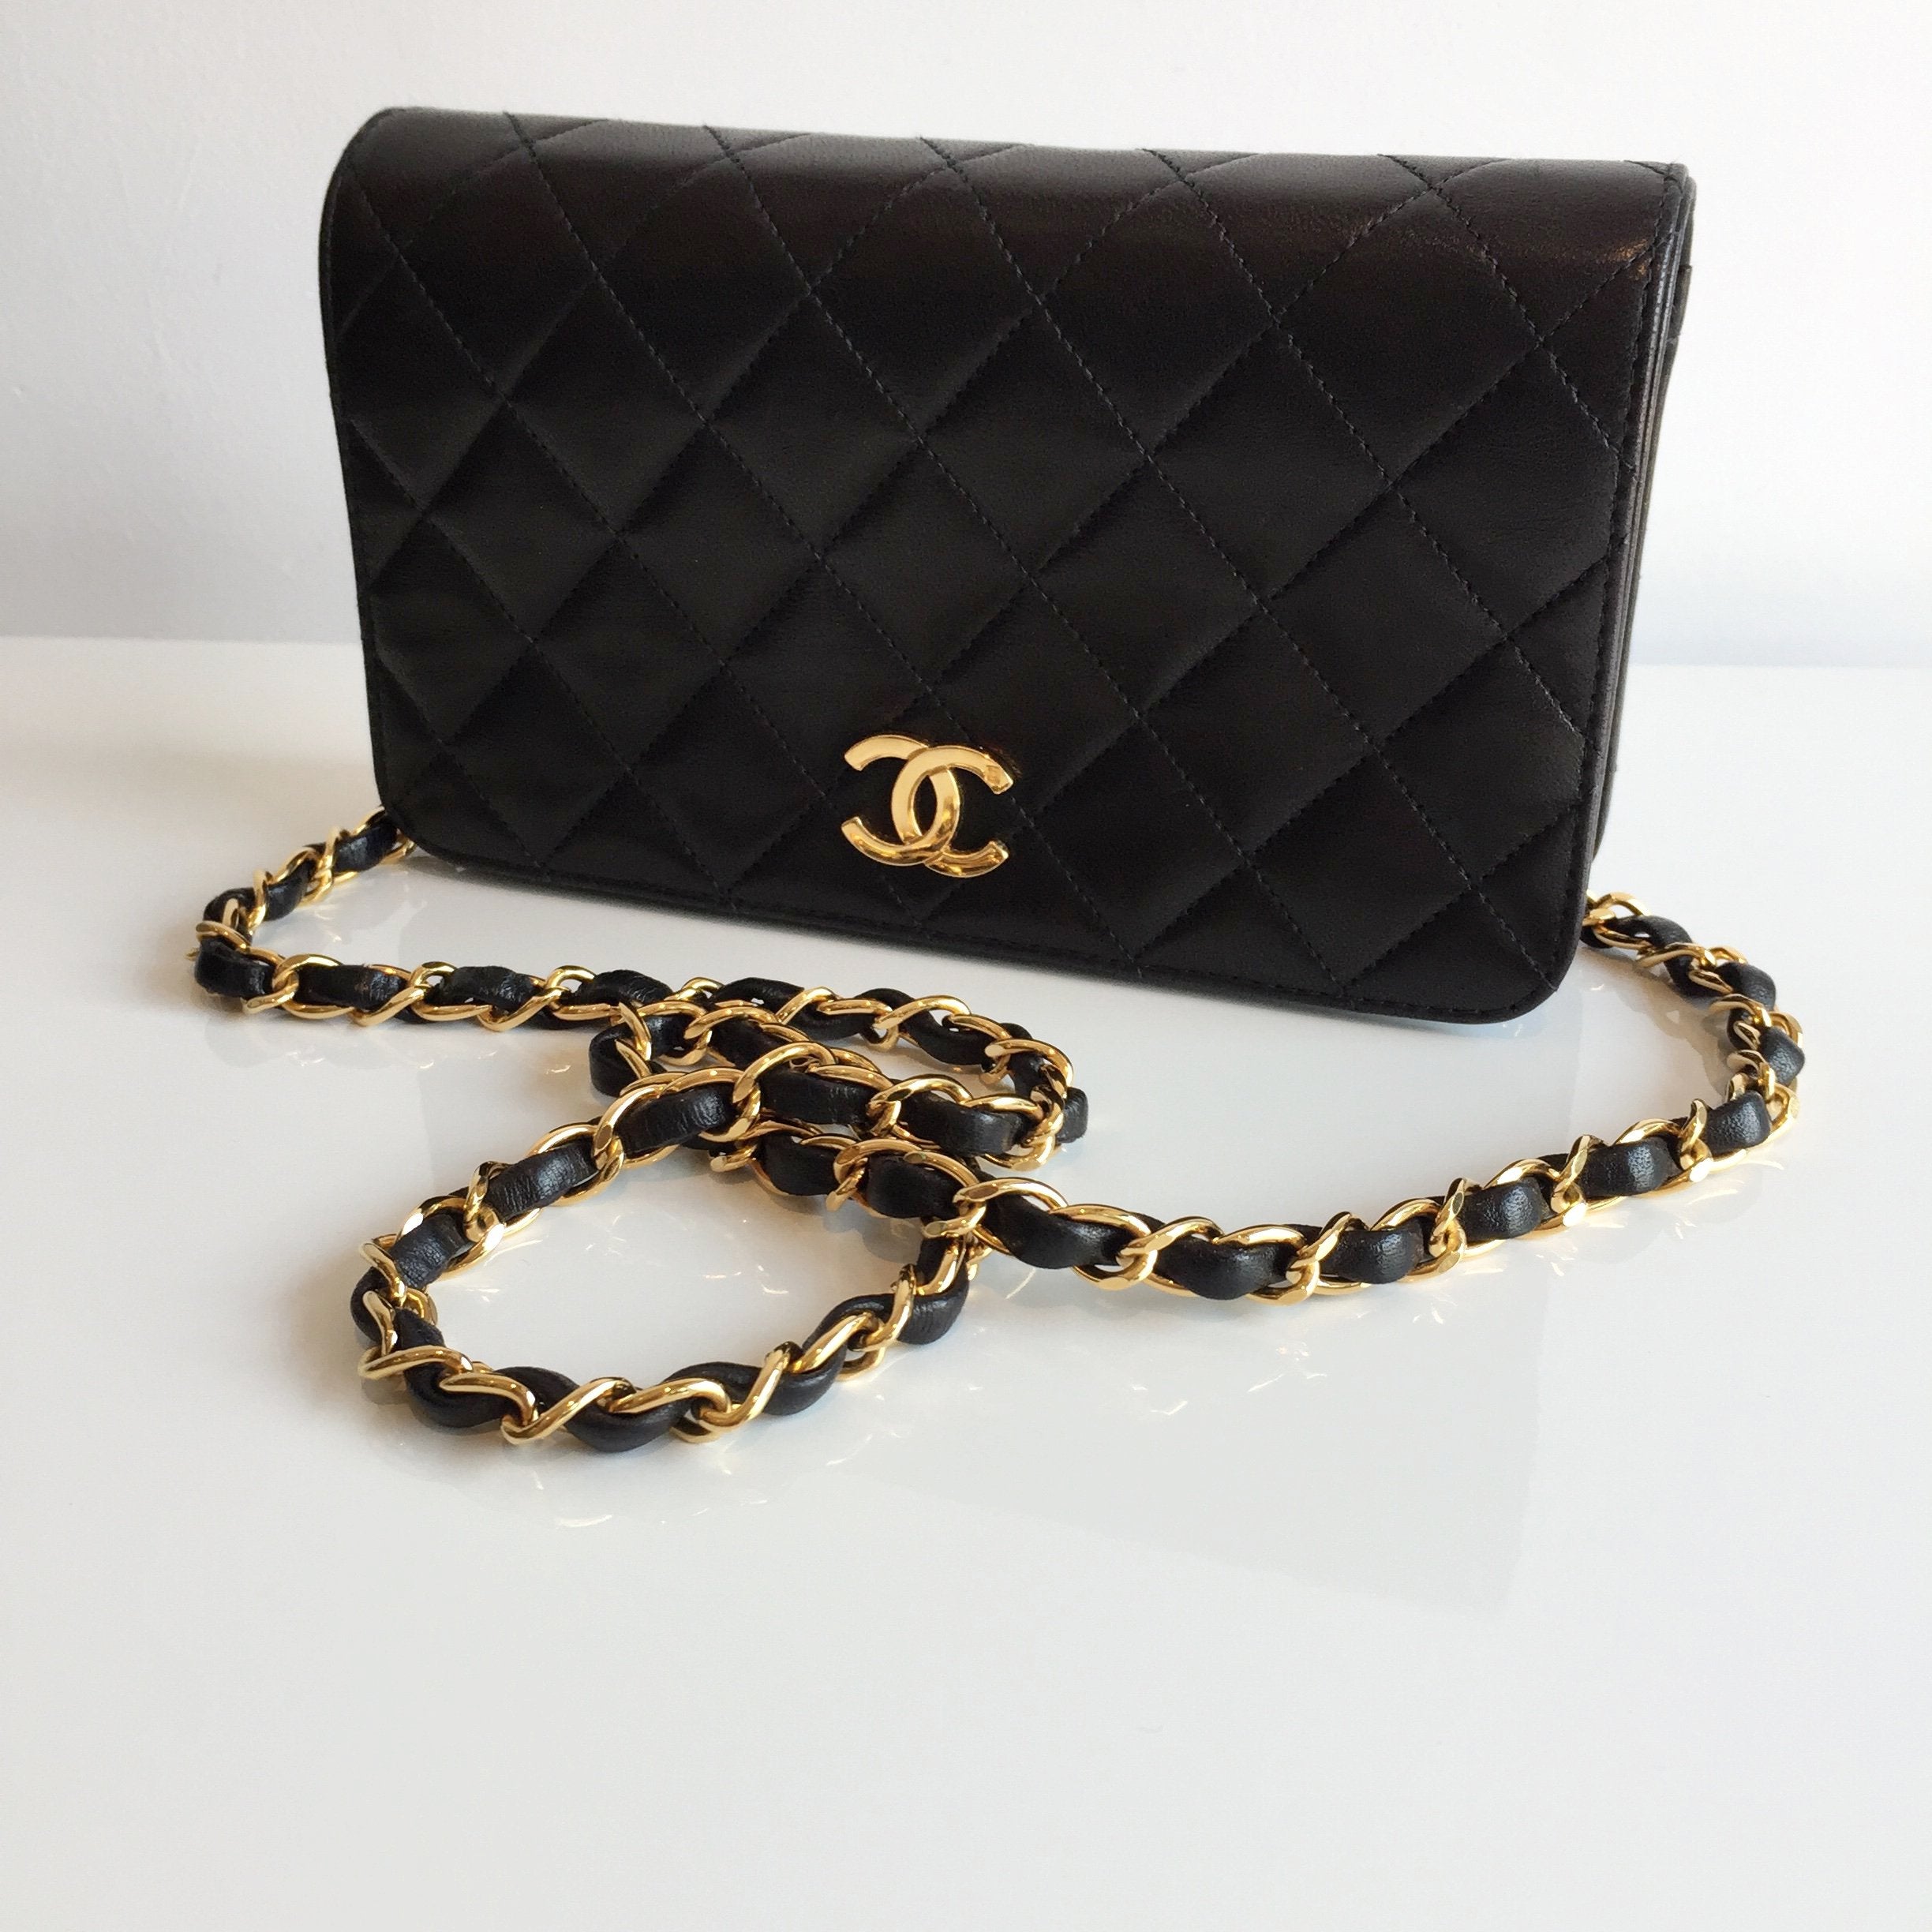 Authentic CHANEL Vintage Small Clutch with Chain